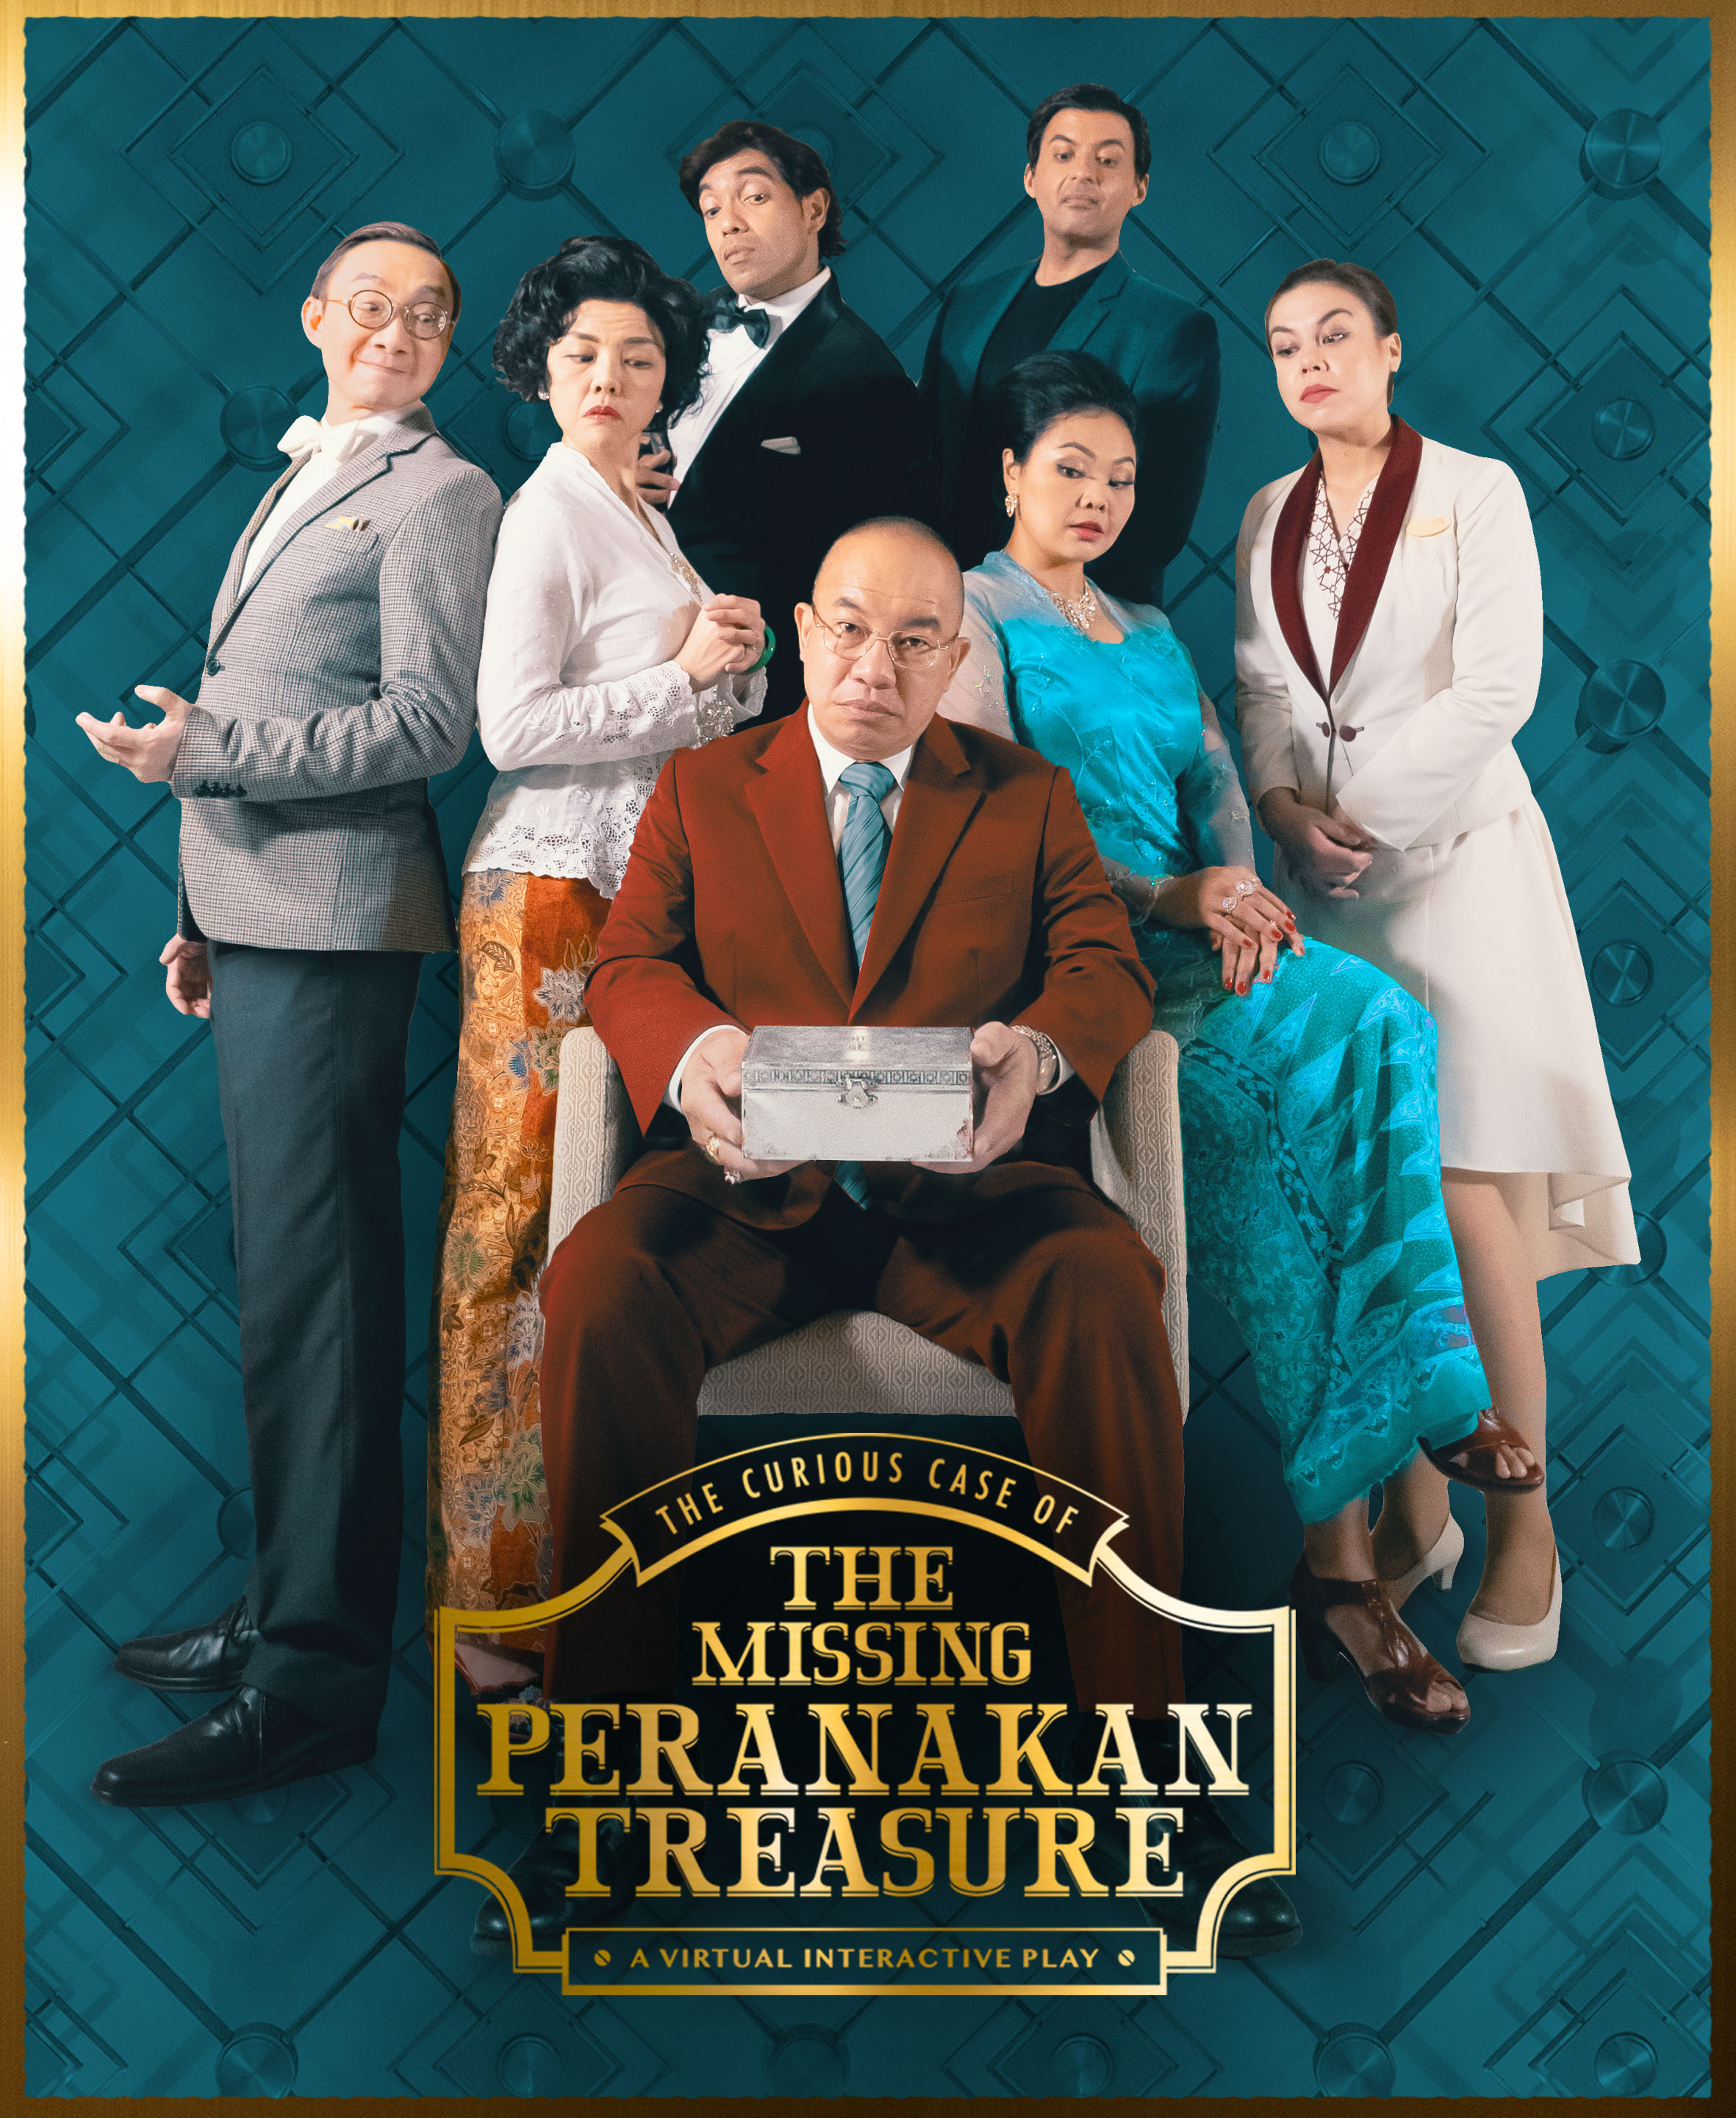 The Curious Case of the Missing Peranakan Treasure